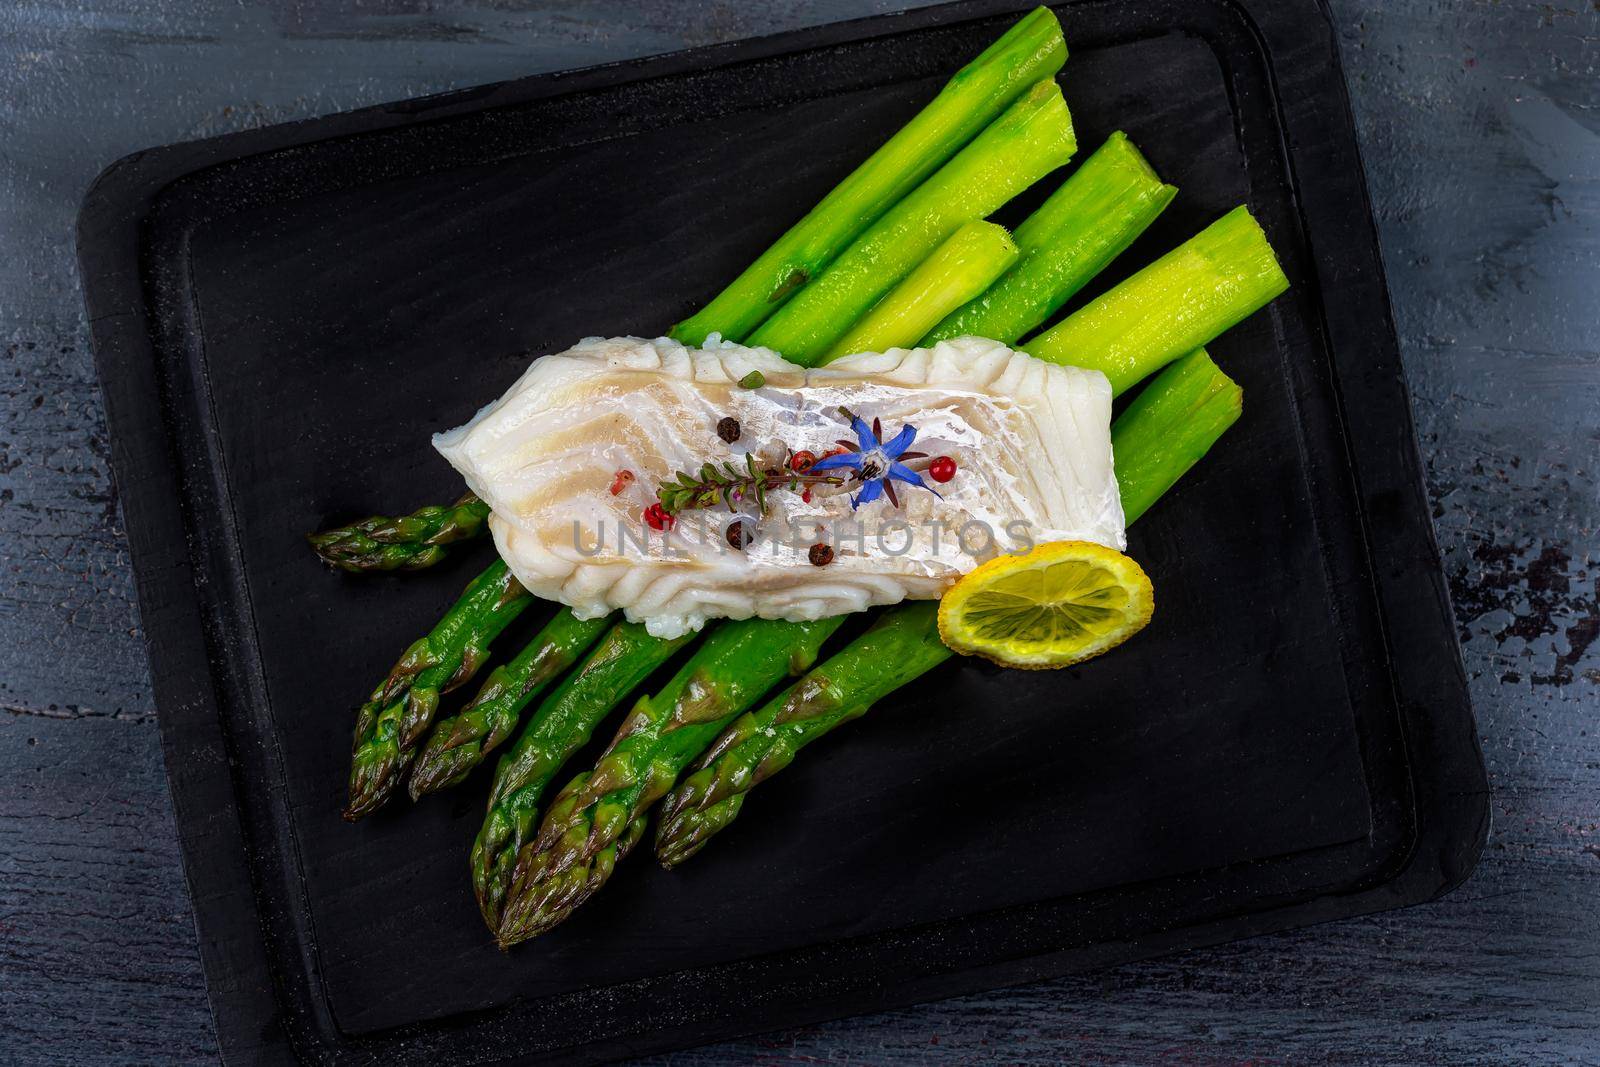 Cod pavement placed on green asparagus, seen from above.